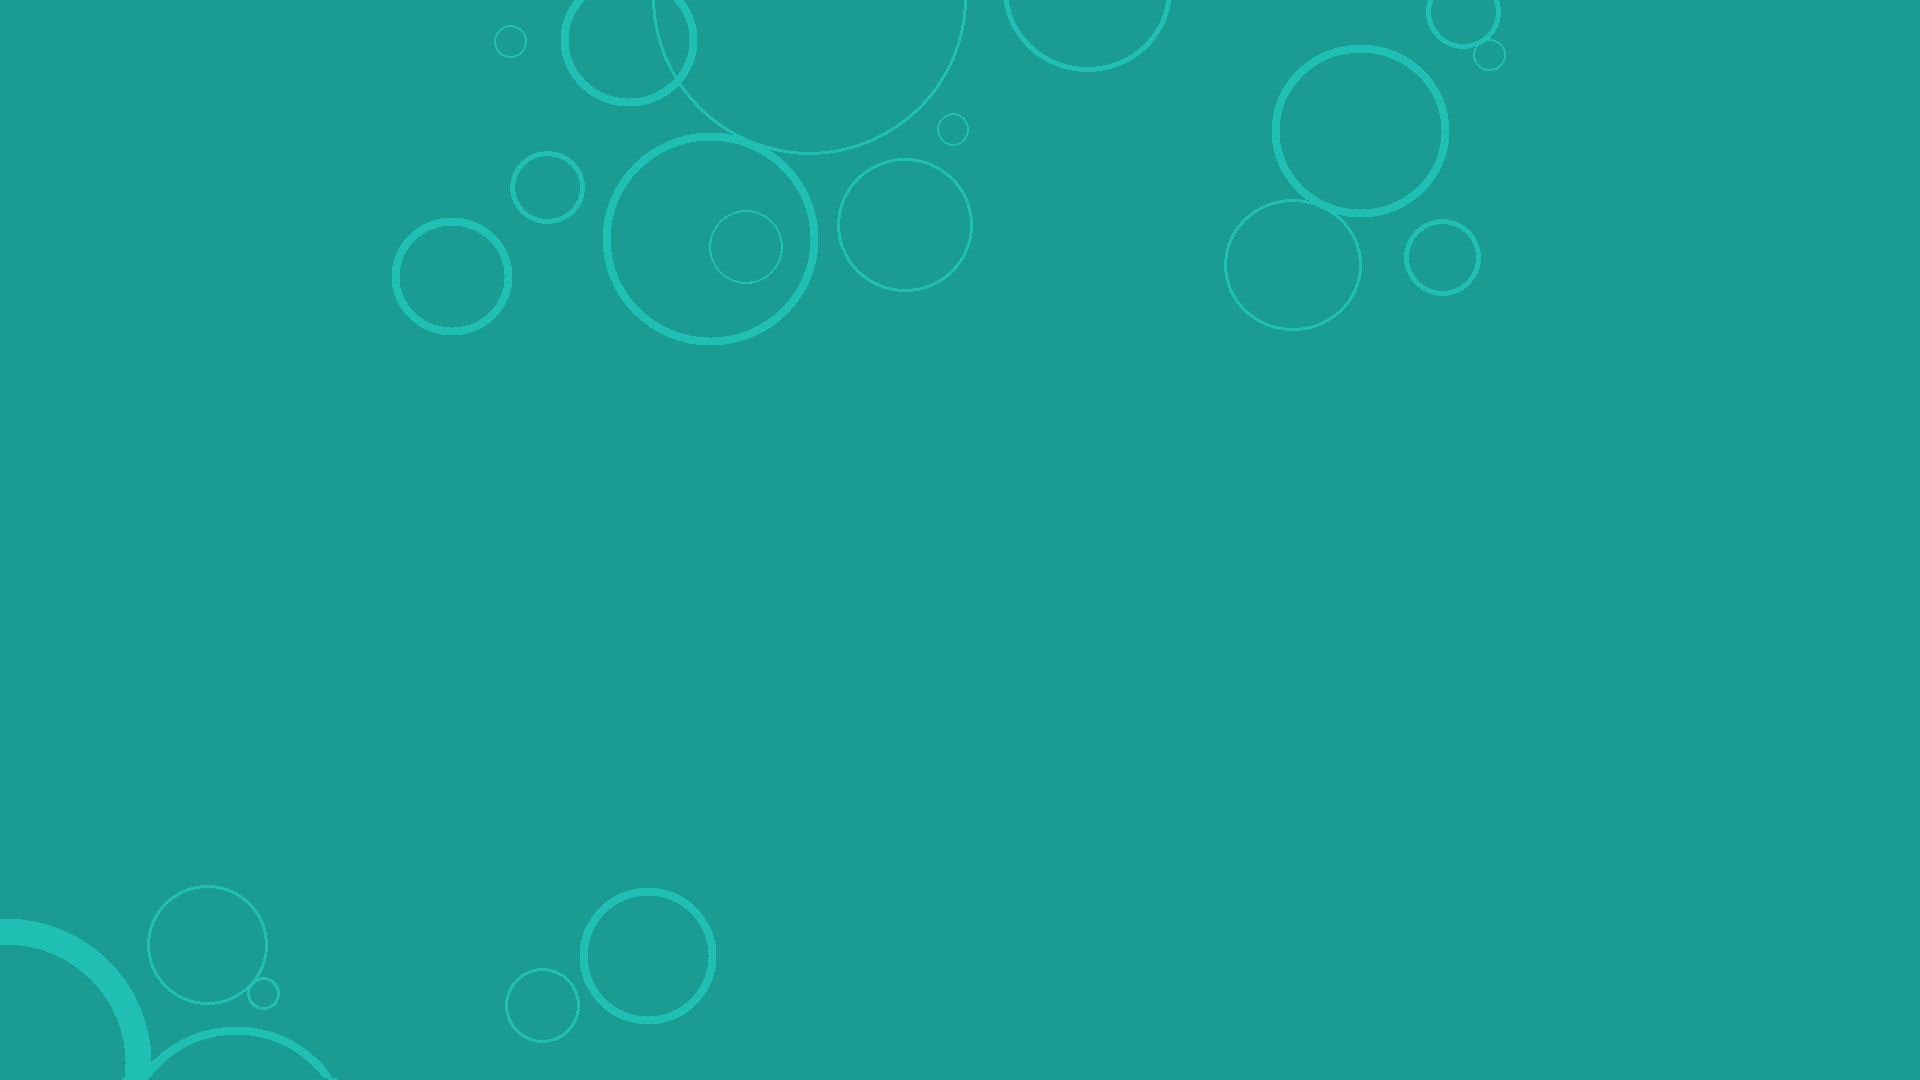 Teal Windows Bubbles Background by gifteddeviant